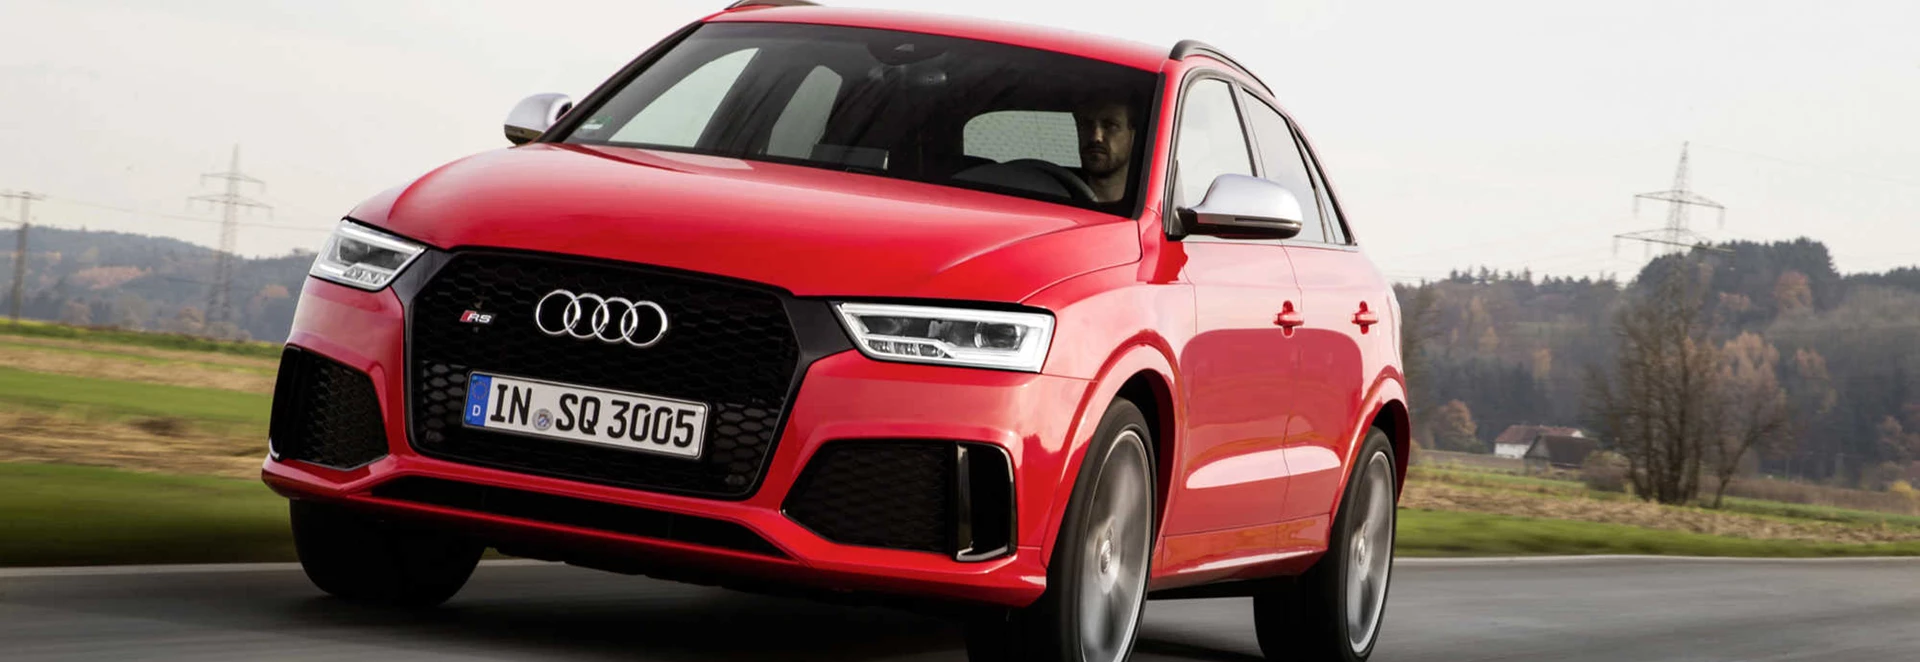 Audi RS Q3 crossover review 